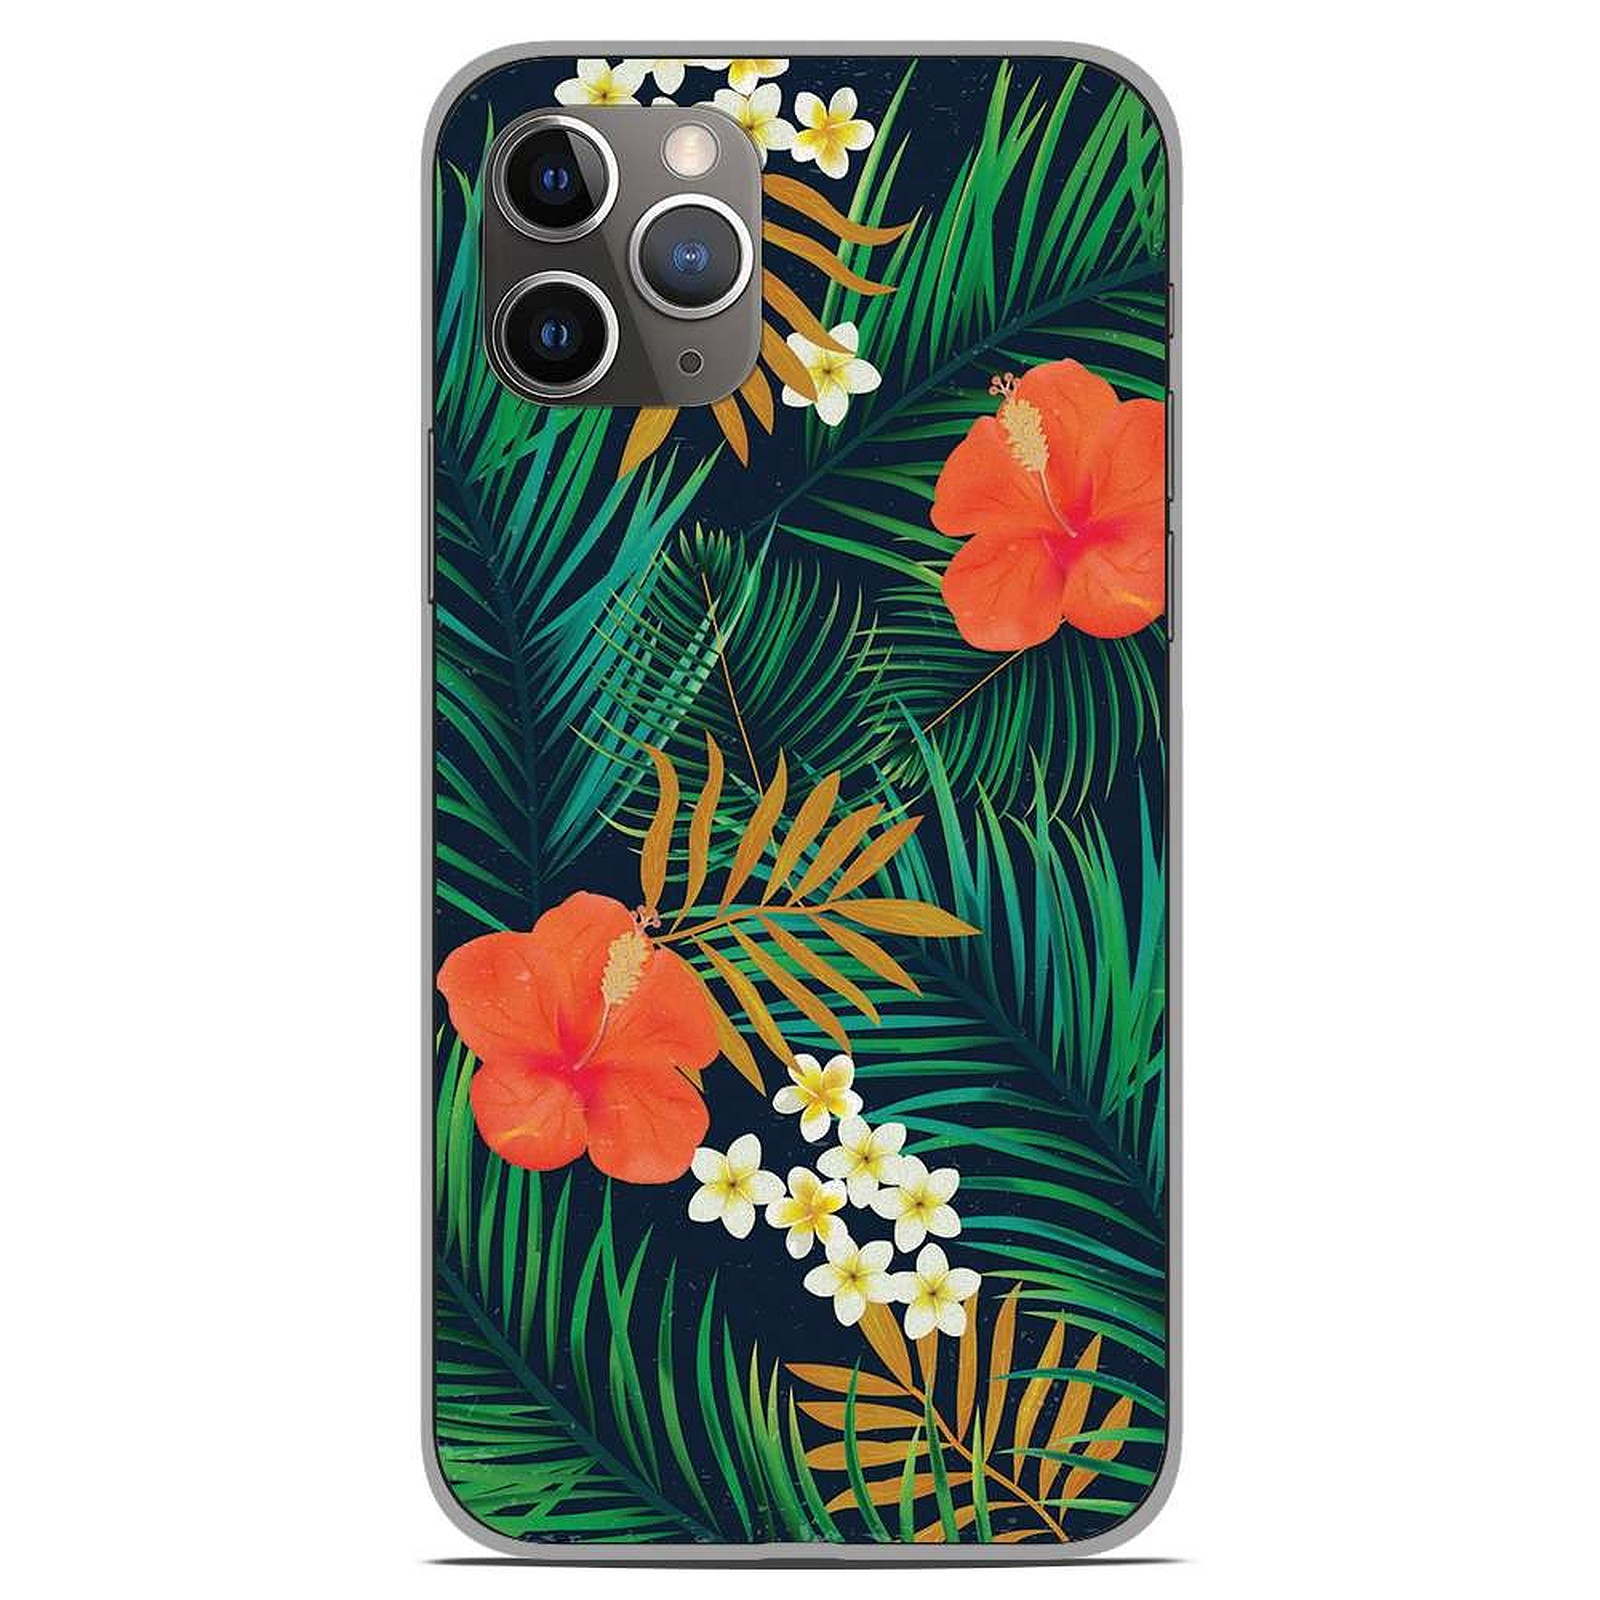 1001 Coques Coque silicone gel Apple iPhone 11 Pro motif Tropical - Coque telephone 1001Coques